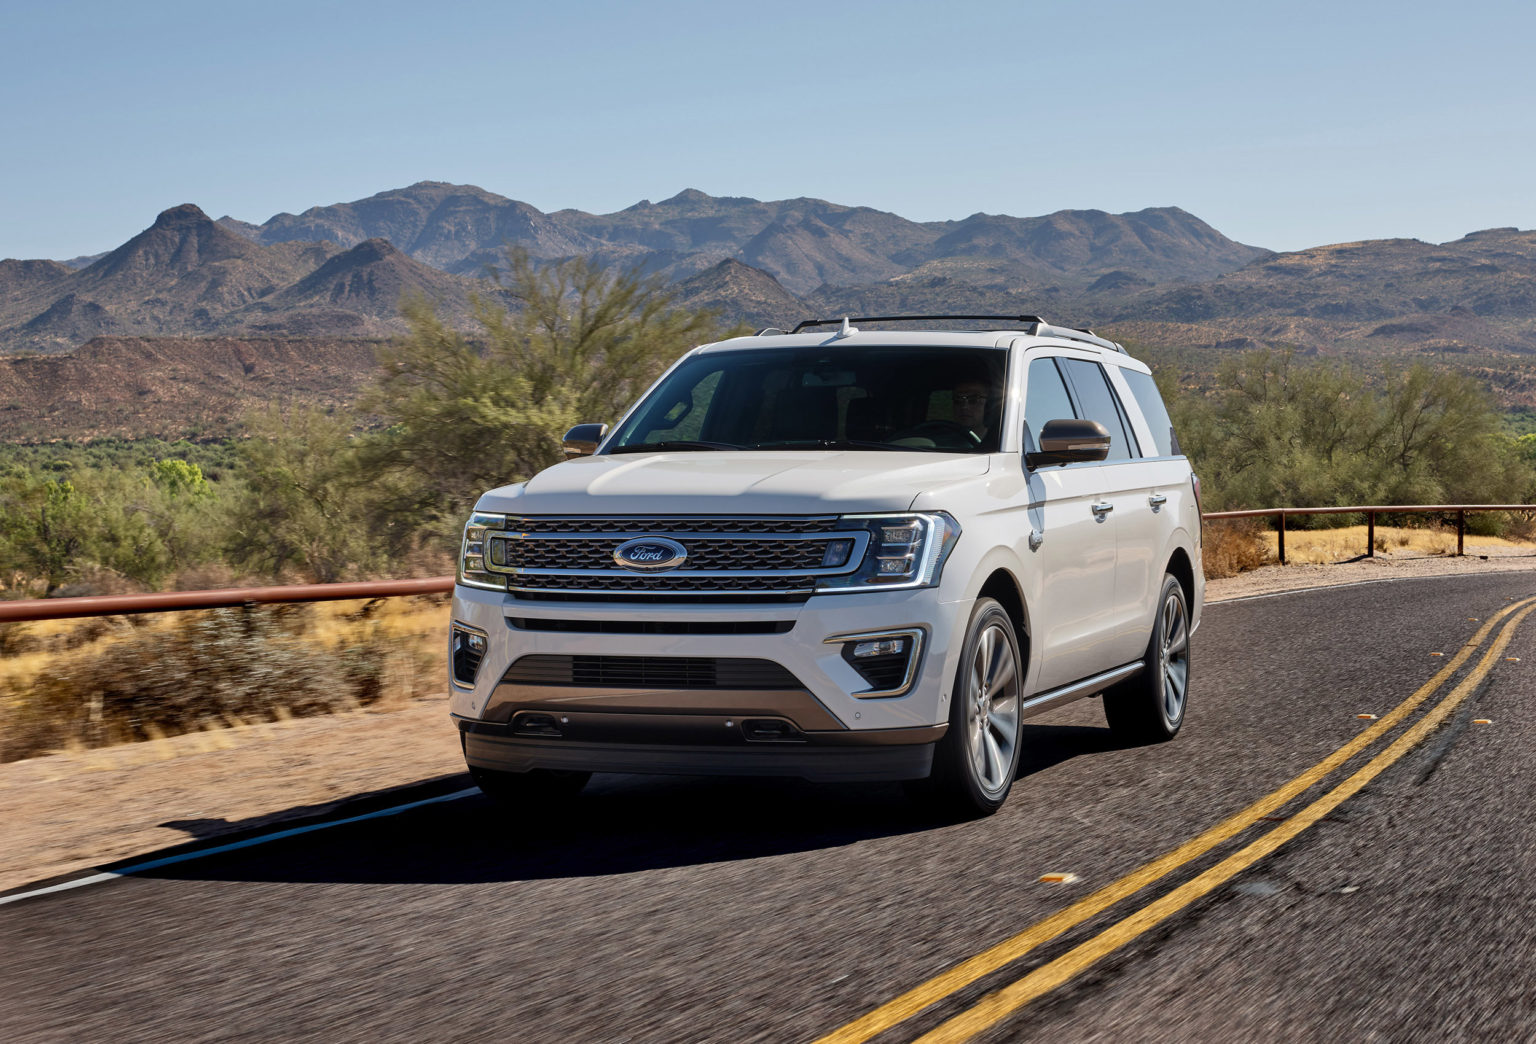 The Ford Expedition is just one of the vehicles suited for a road trip.